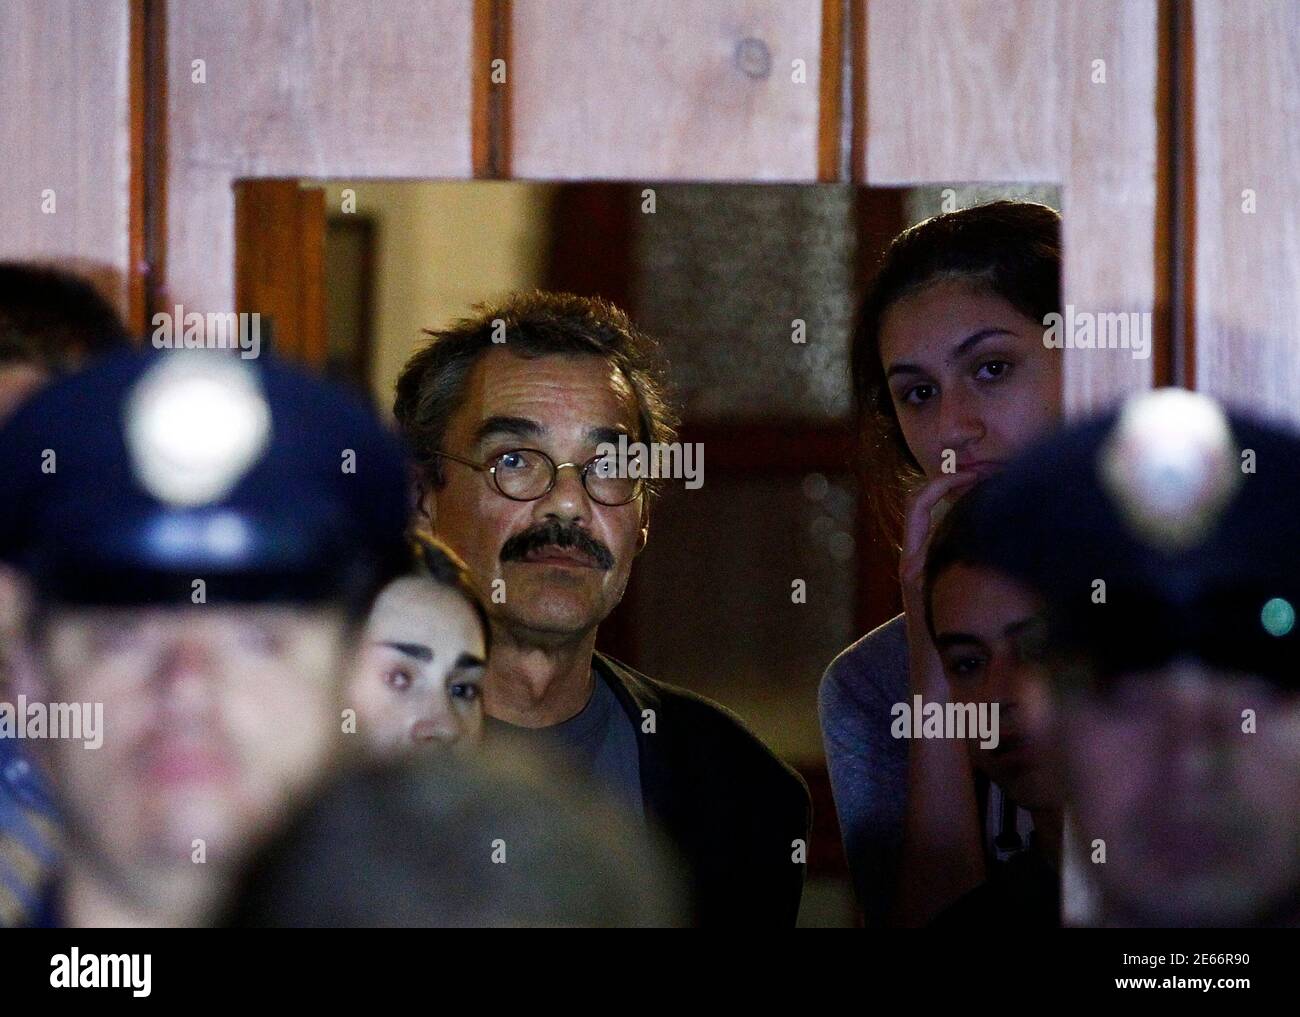 Gonzalo Garcia Barcha (L, rear), son of Colombian Nobel Prize laureate Gabriel Garcia Marquez, looks out of the door of Garcia Marquez home as a communique is being read to the media in Mexico City April 17, 2014. Garcia Marquez, the Colombian author whose beguiling stories of love and longing brought Latin America to life for millions of readers and put magical realism on the literary map, died on Thursday. He was 87. Fans will pay their last respects to him in the Palace of Fine Arts in Mexico City on Monday and he will be cremated in a private ceremony.  REUTERS/Edgard Garrido (MEXICO - Tag Stock Photo